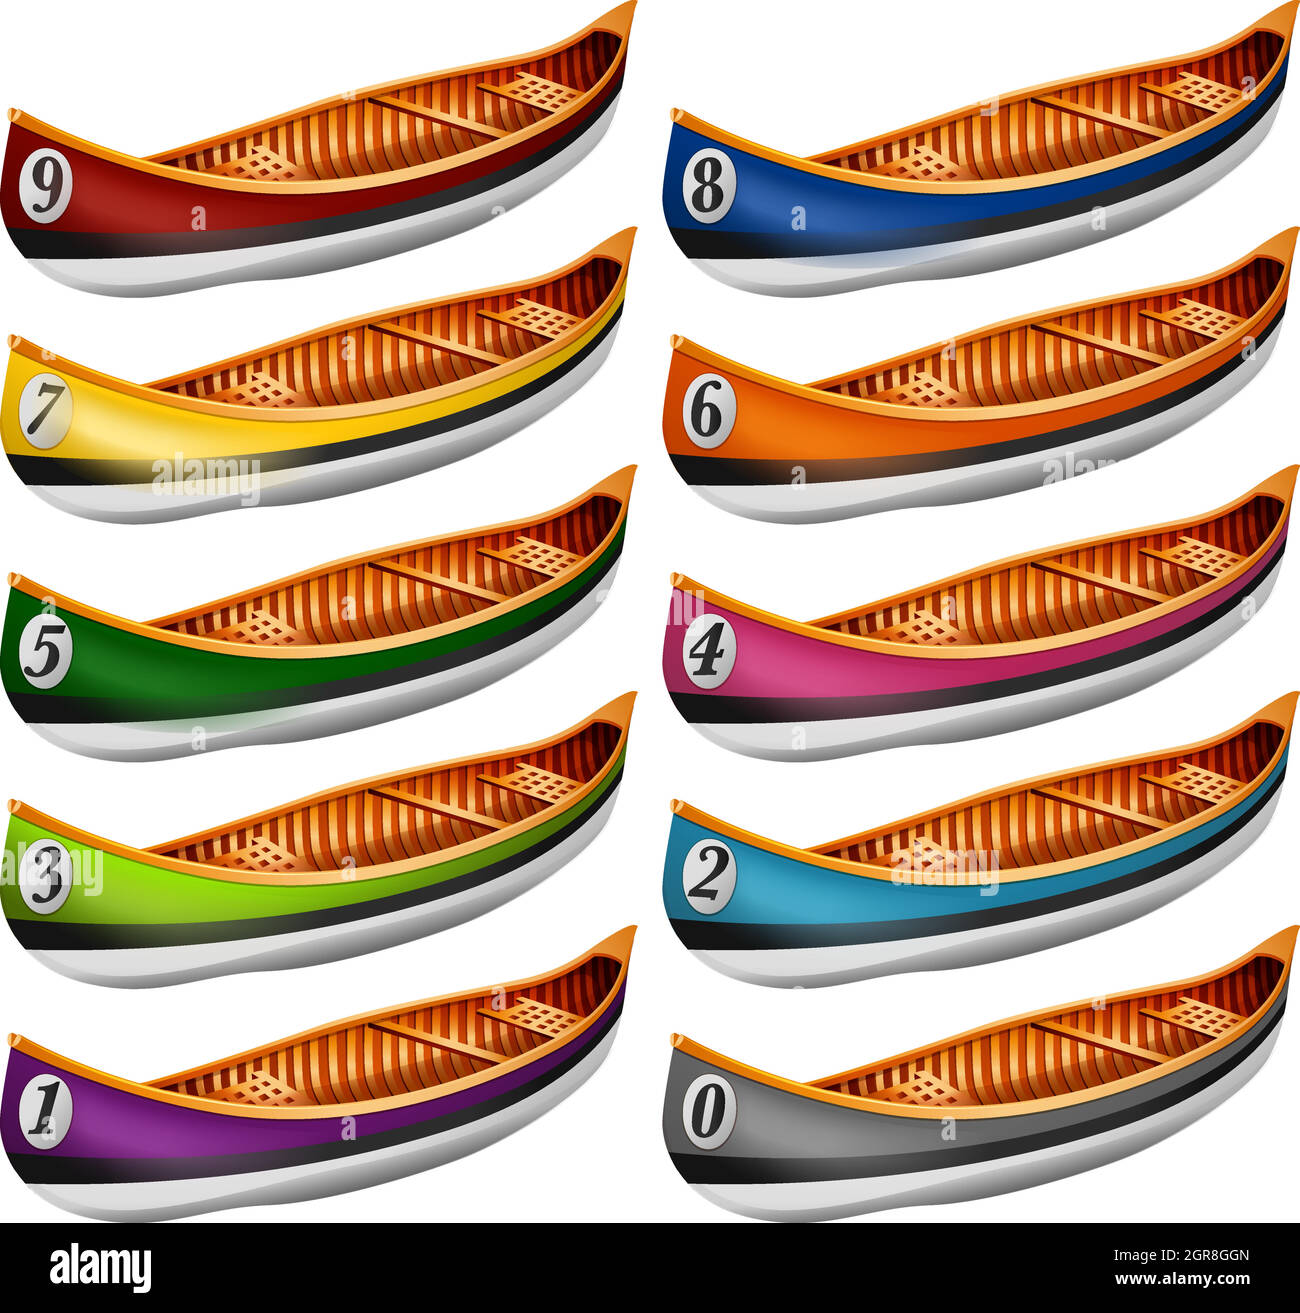 Canoes in different colors Stock Vector